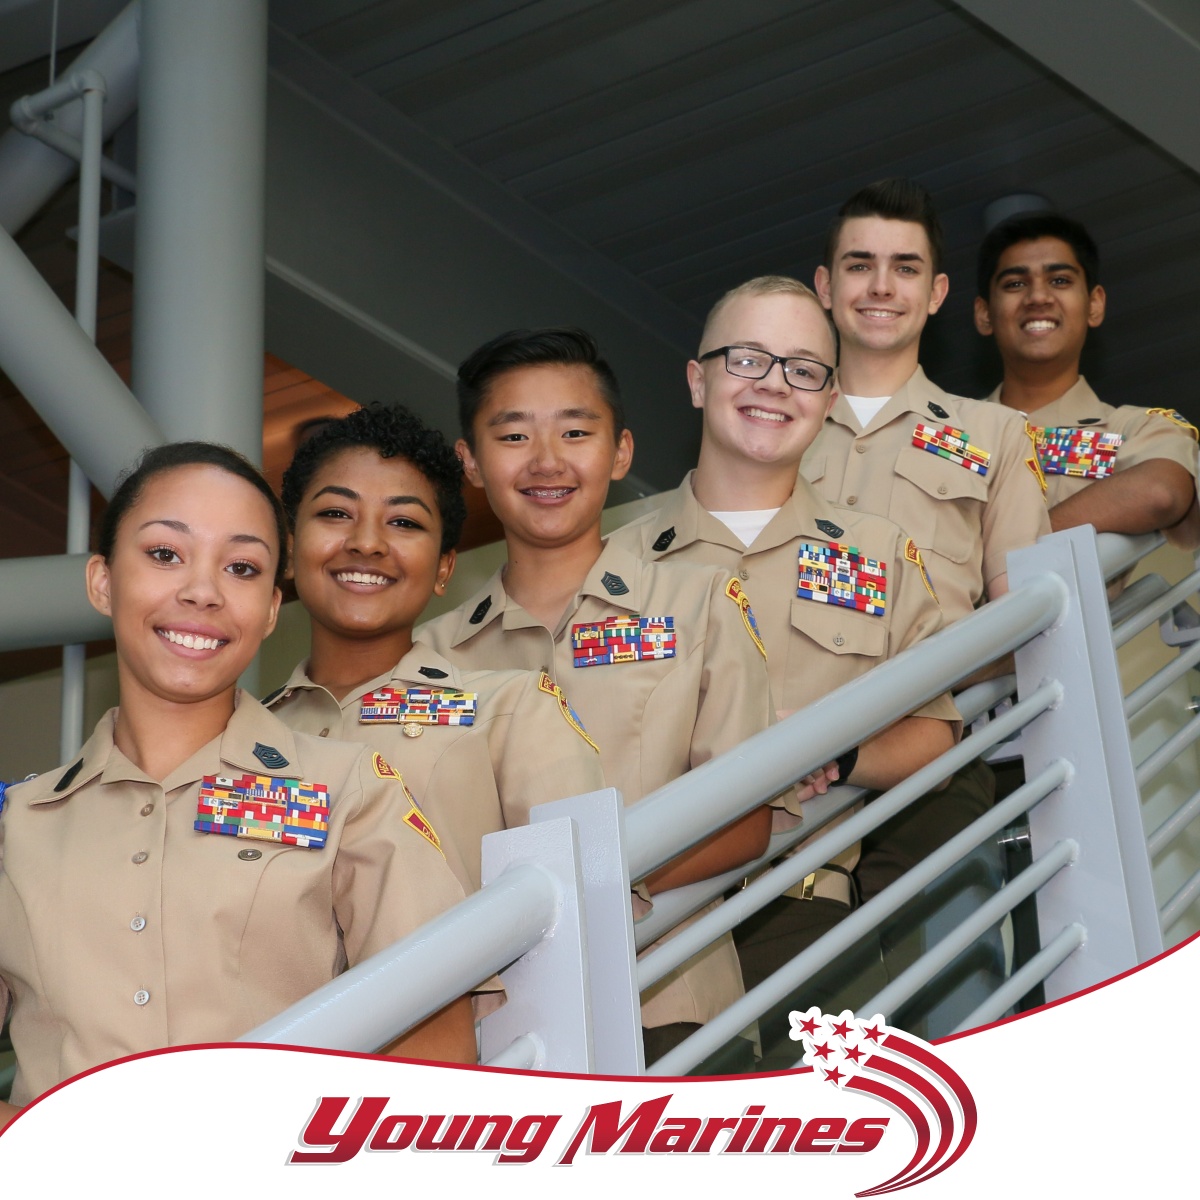 youngmarines.org